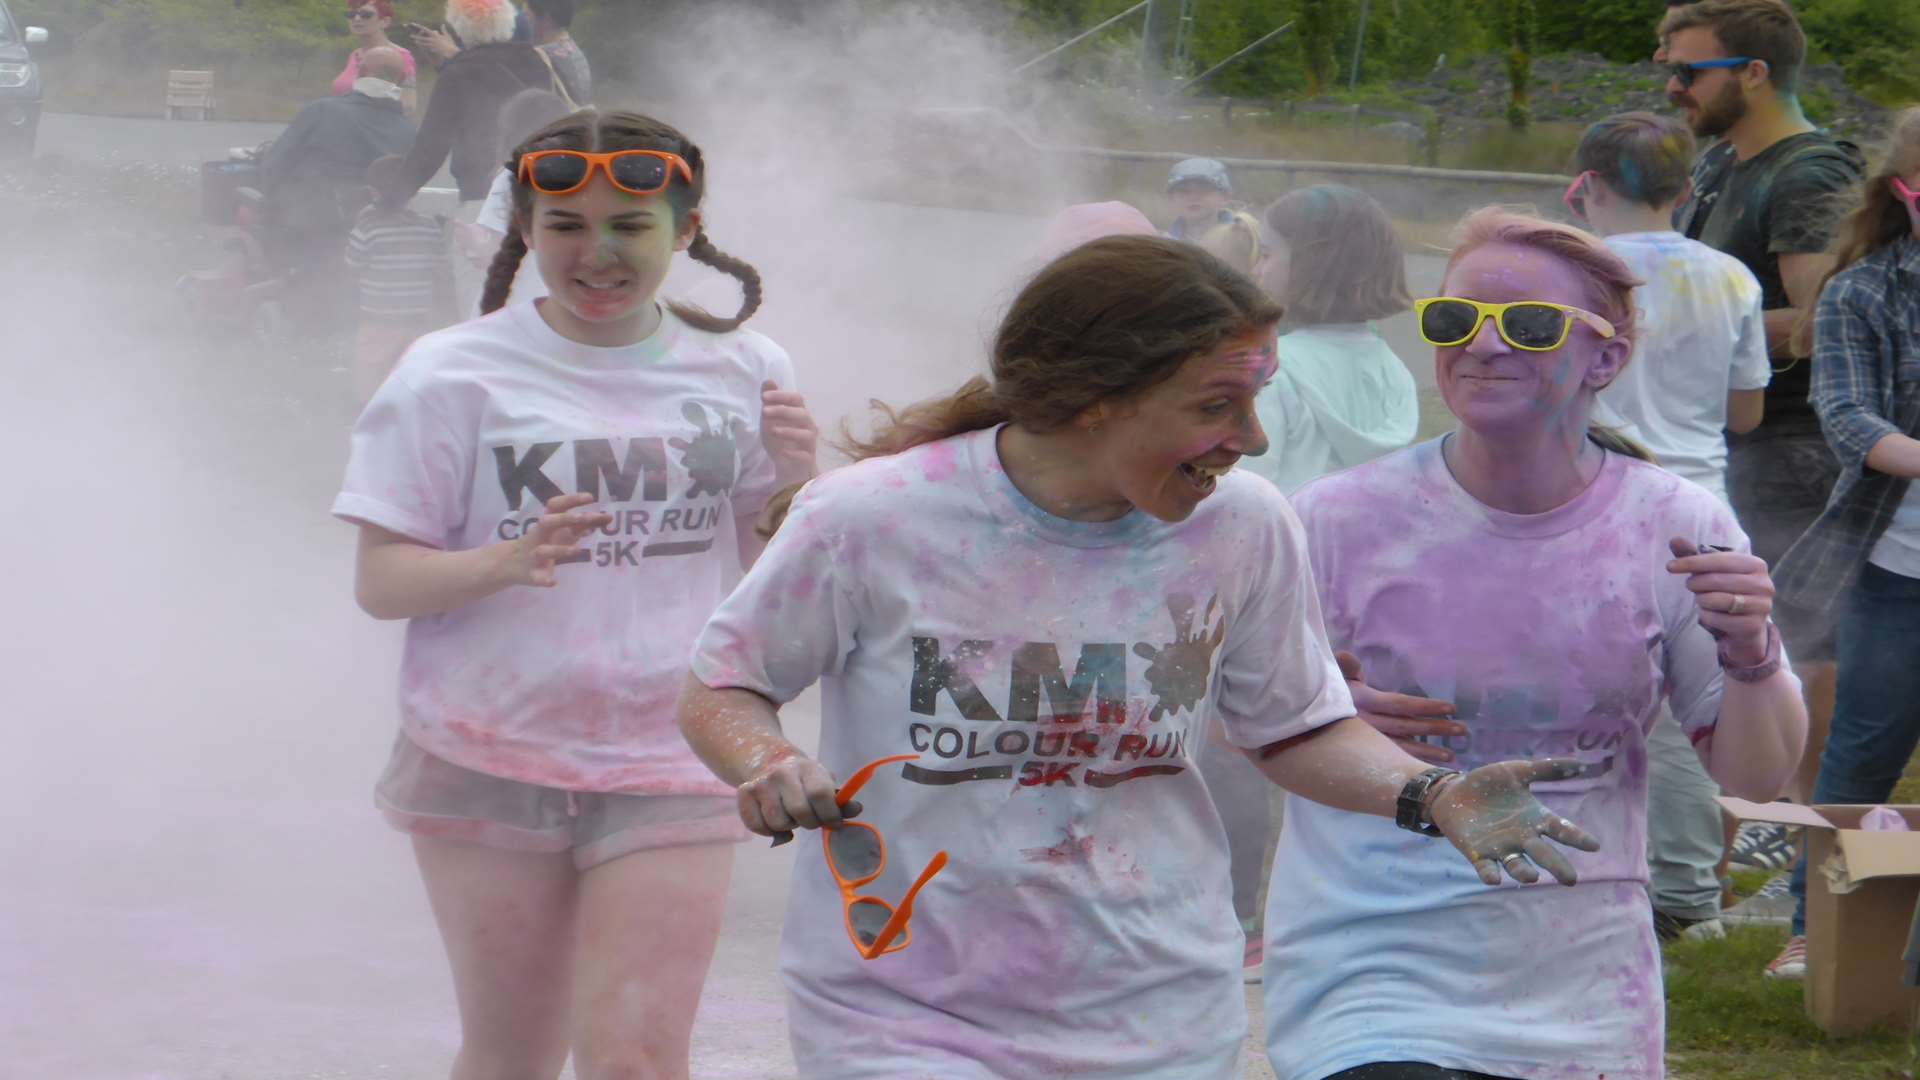 500 adults and 100 children took part in the KM Colour Run at Betteshanger Park. 66 charities from every corner of the county took part raising £25k for good causes.